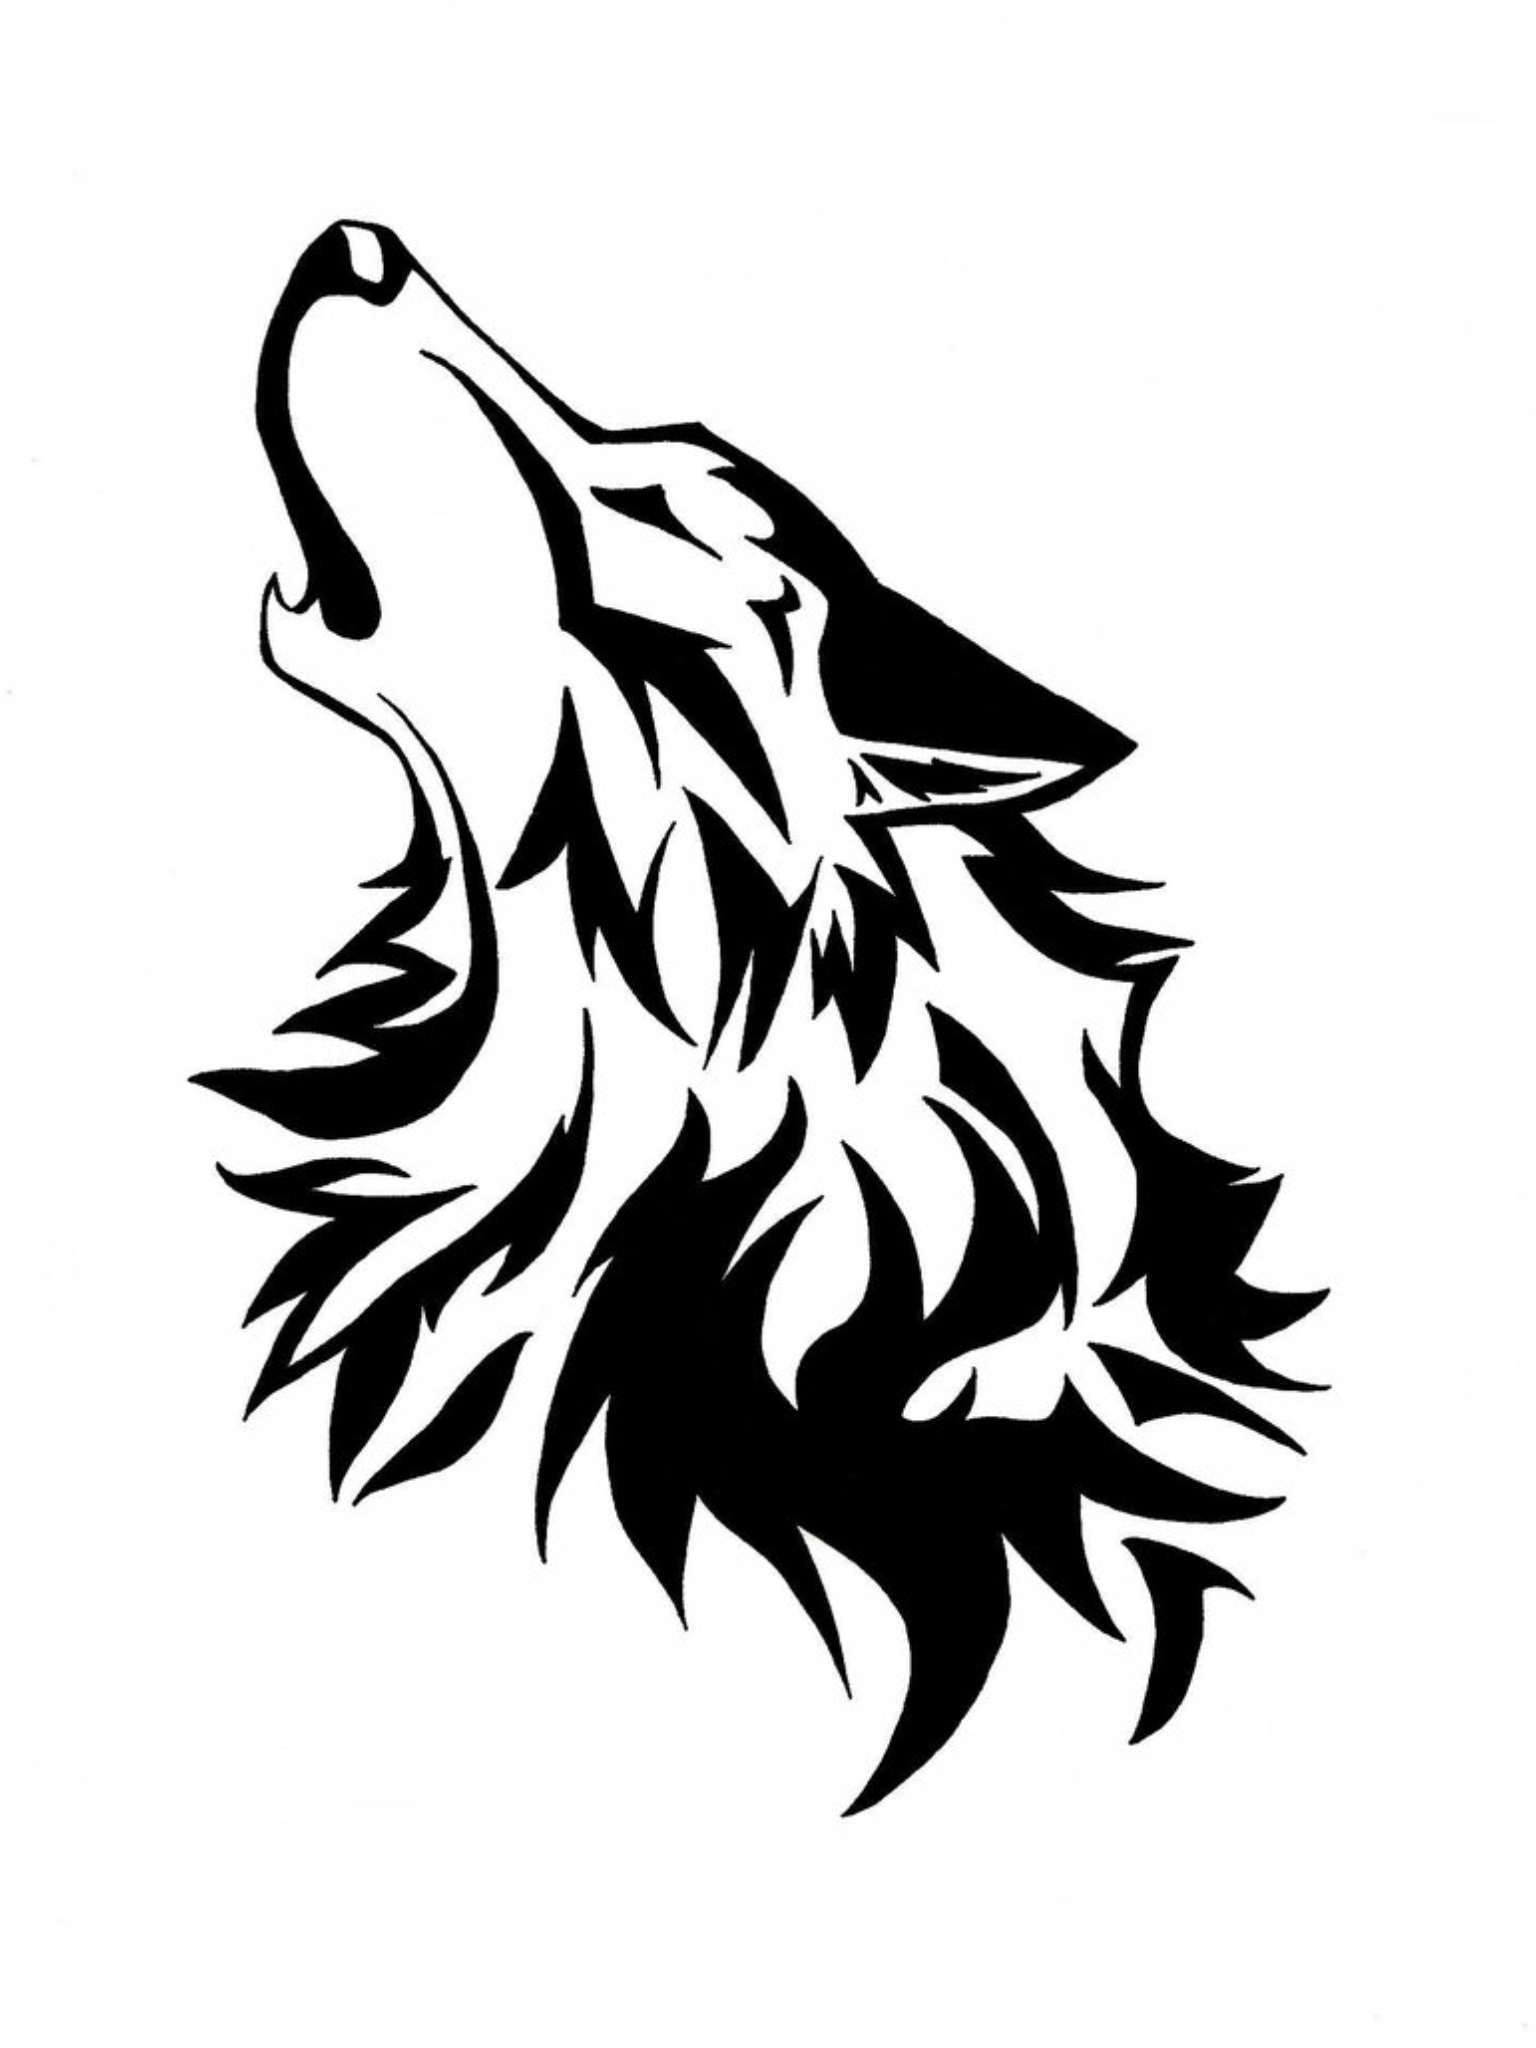 Howling Wolf Icon at Vectorified.com | Collection of Howling Wolf Icon ...